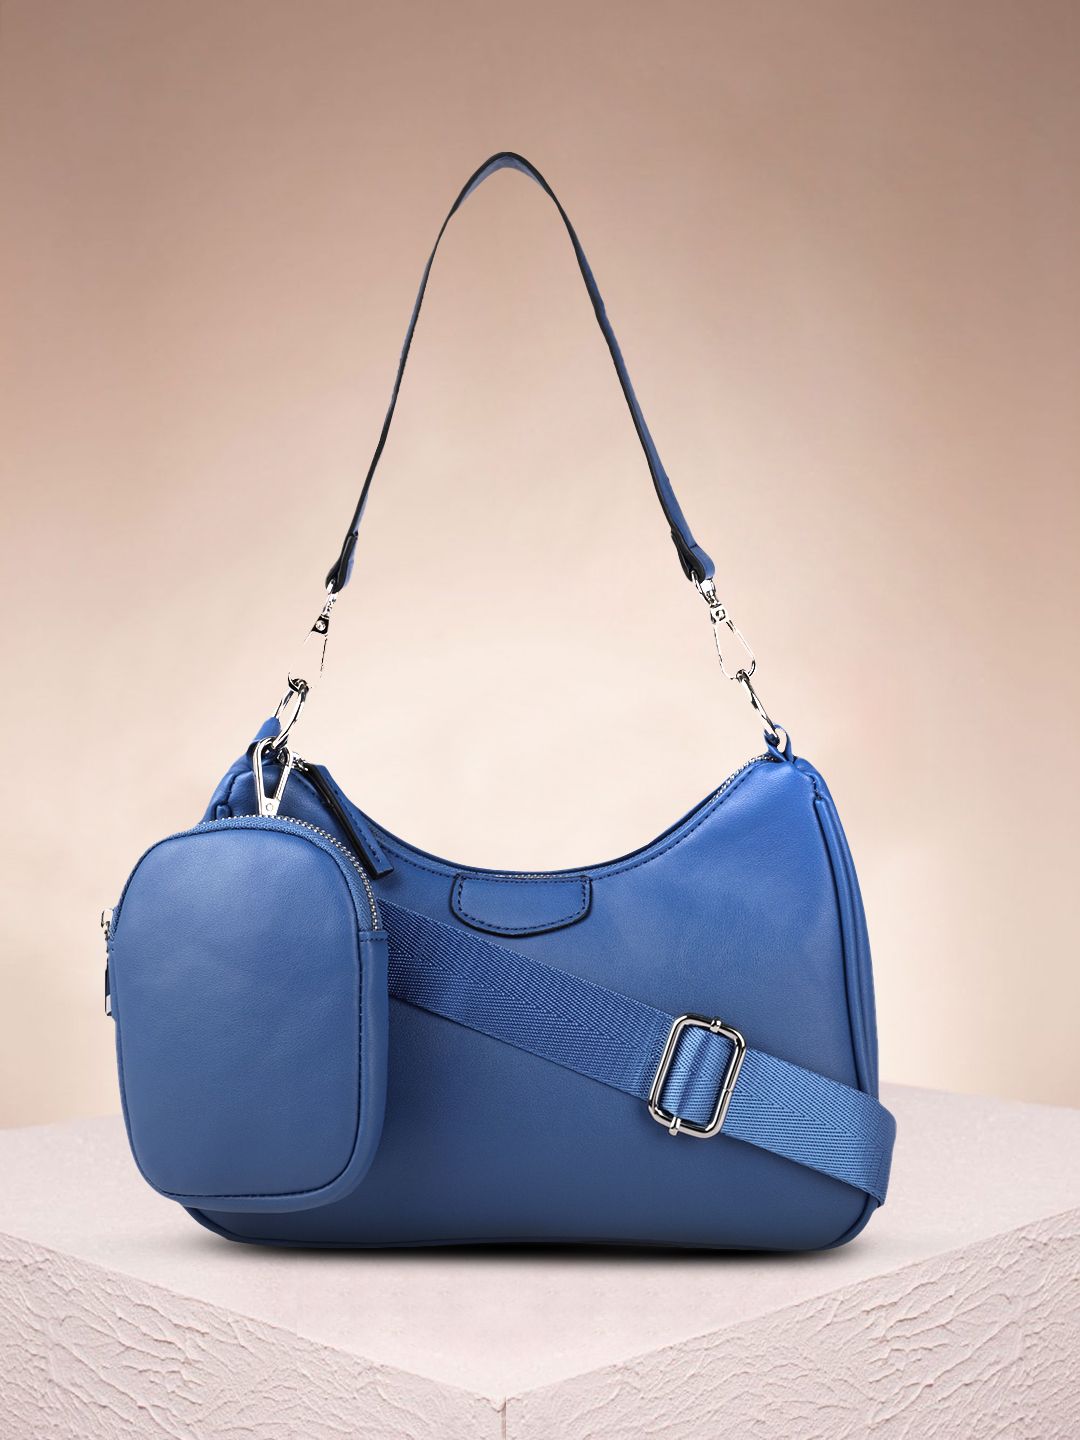 DressBerry Blue Structured Hobo Bag Price in India